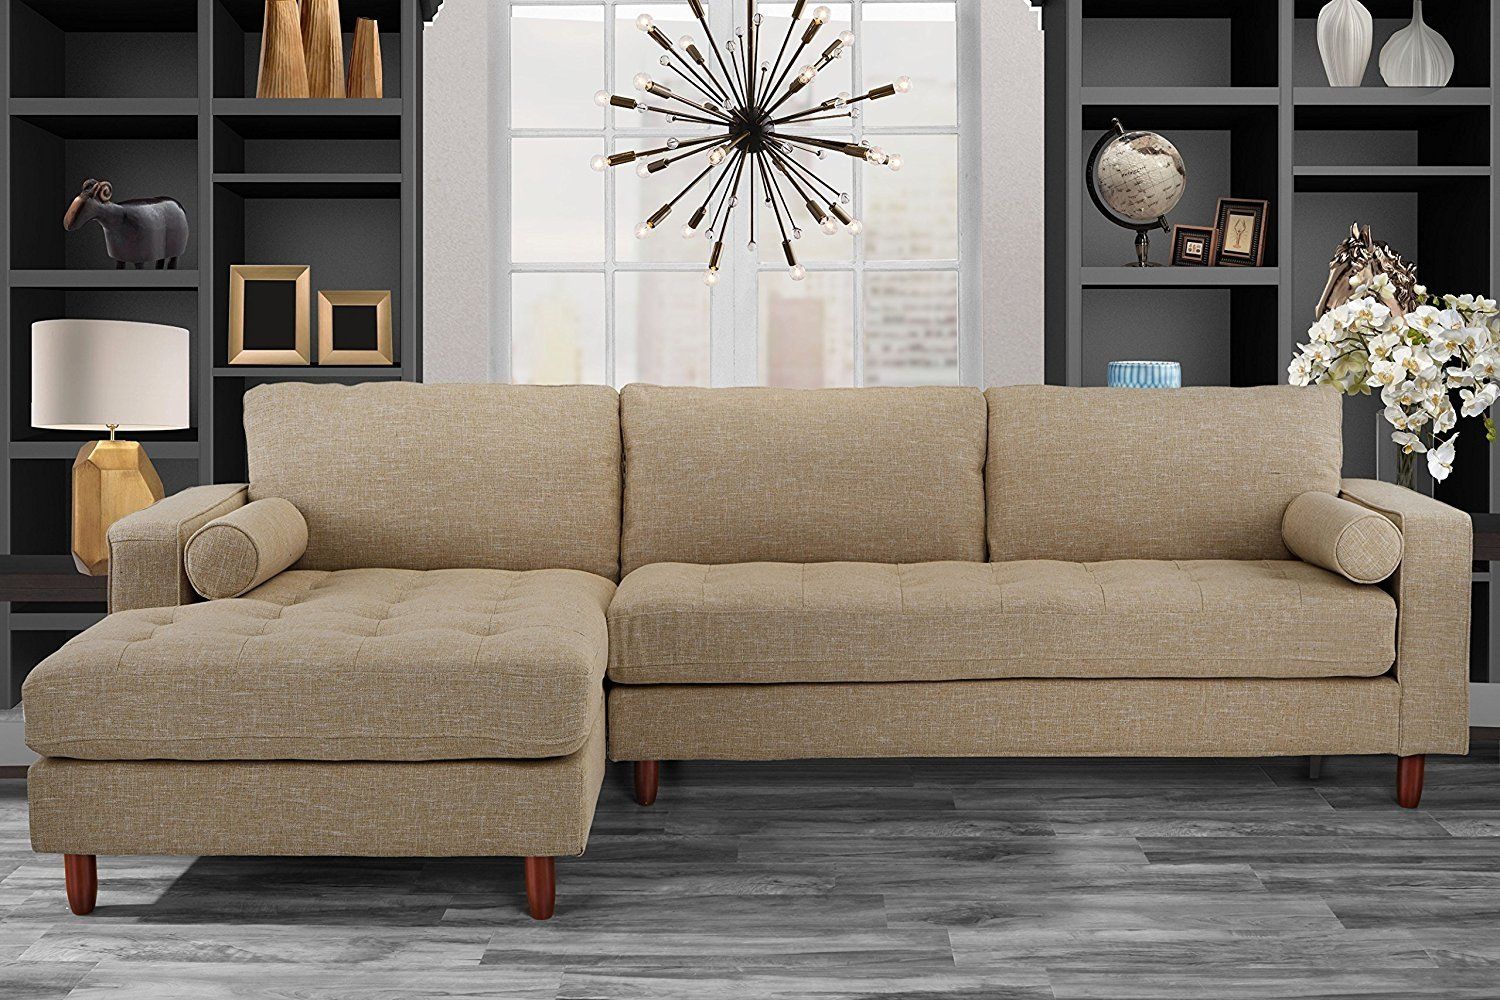 Mid Century Modern Tufted Fabric Sectional Sofa, L Shape Couch Beige Pertaining To Small L Shaped Sectional Sofas In Beige (View 6 of 21)